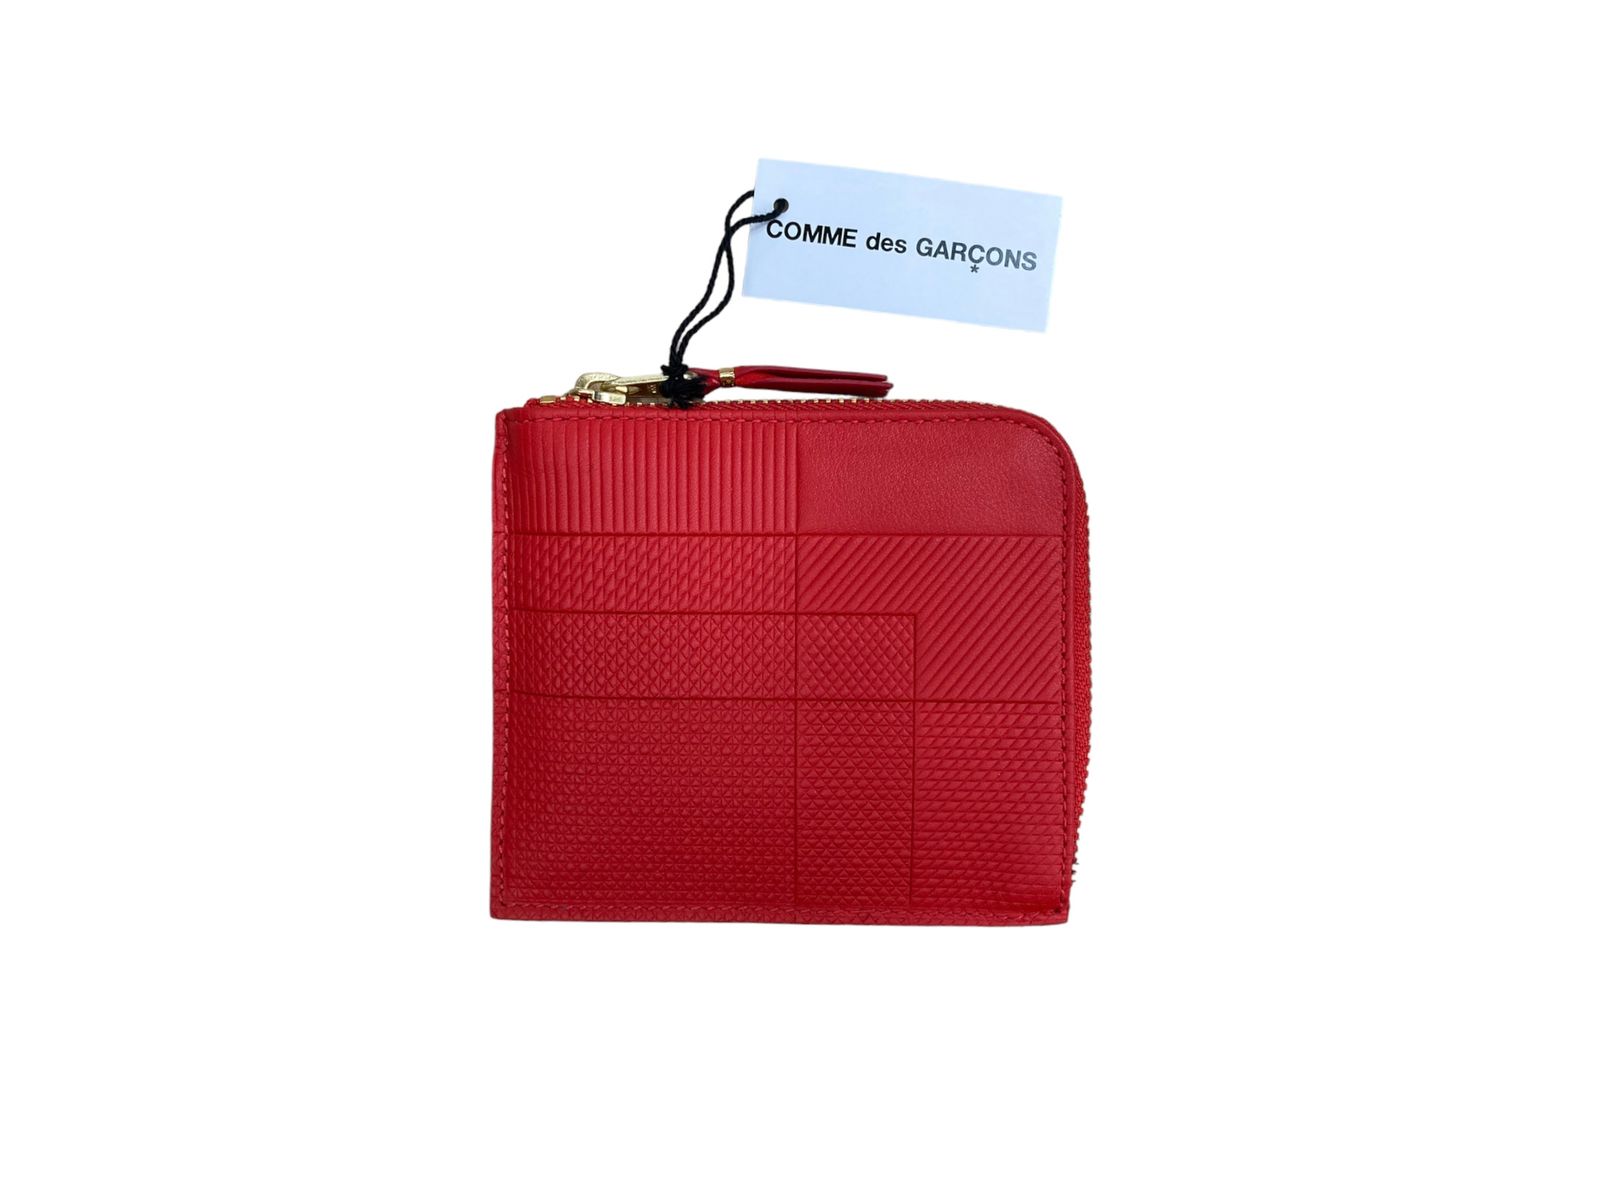 COMME des GARCONS コムデギャルソン INTERSECTION WALLET RD ミニ財布 